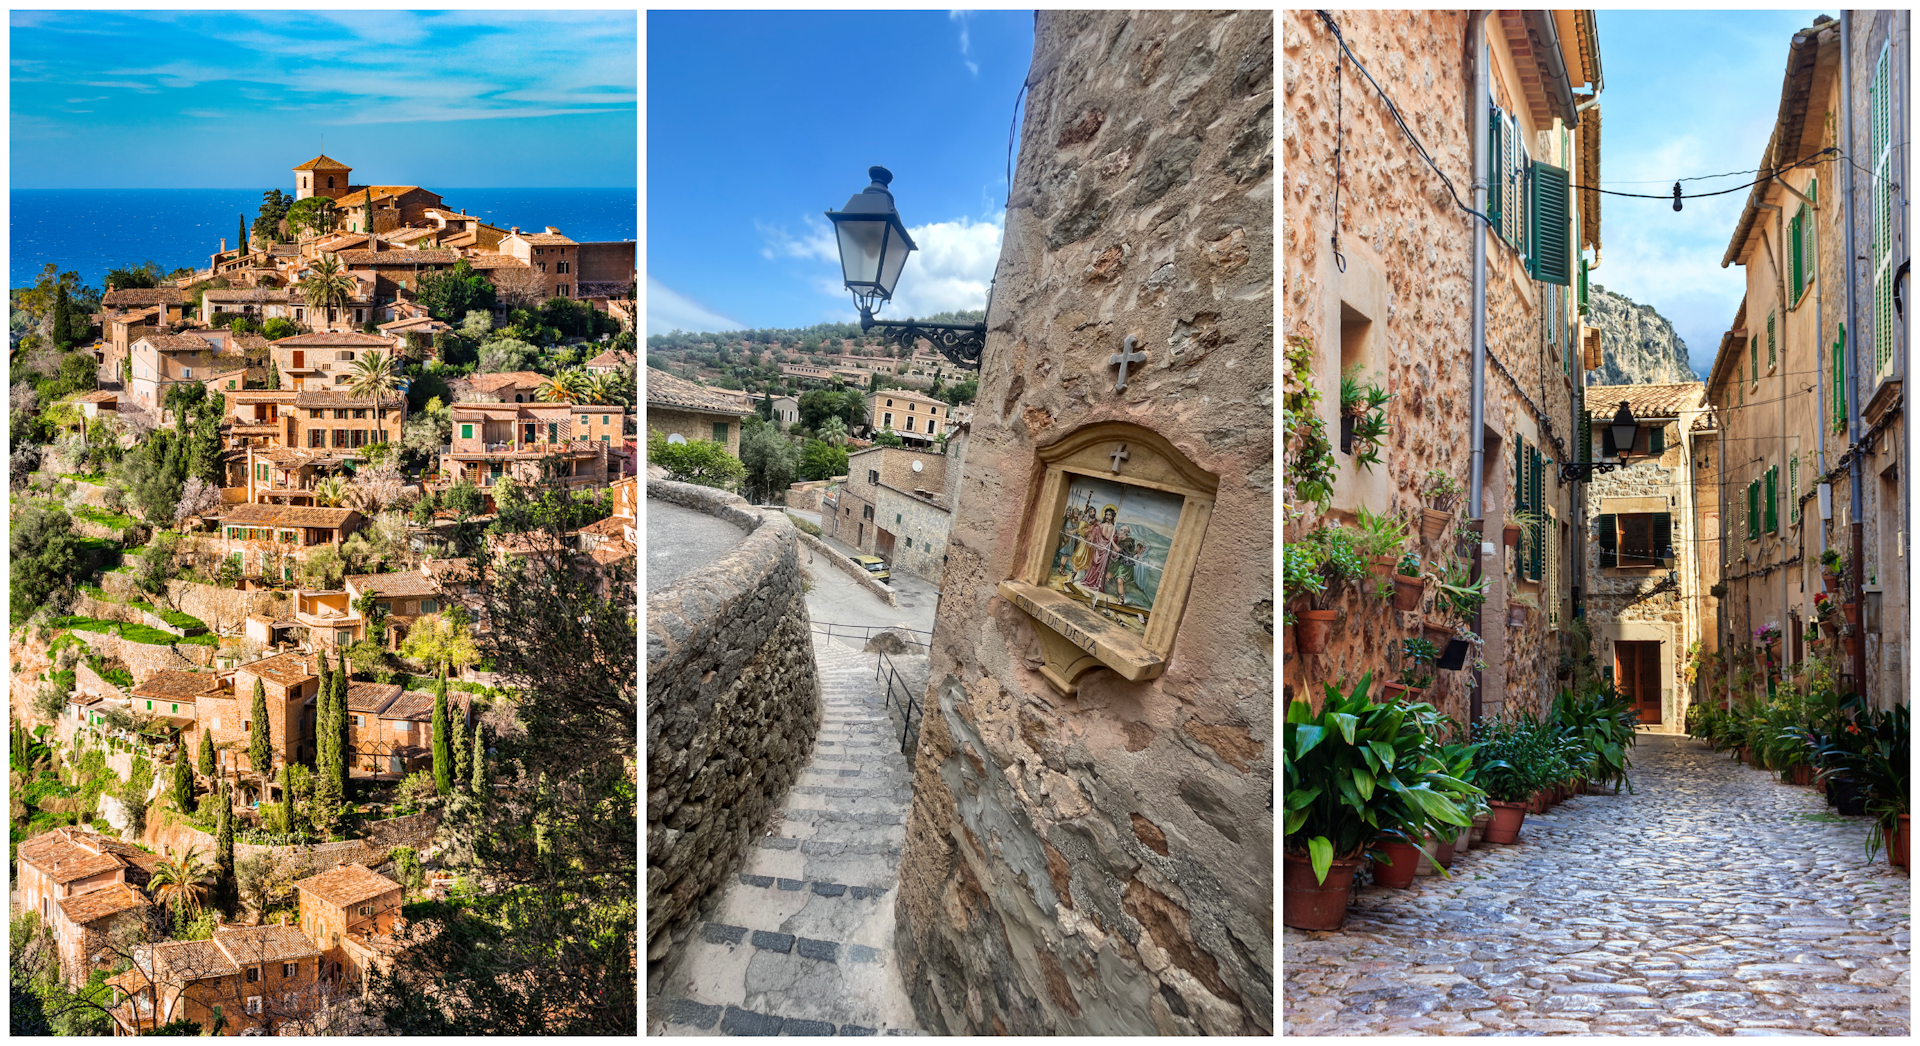 The stone buildings of the towns of Deia and Valldemossa in Mallorca